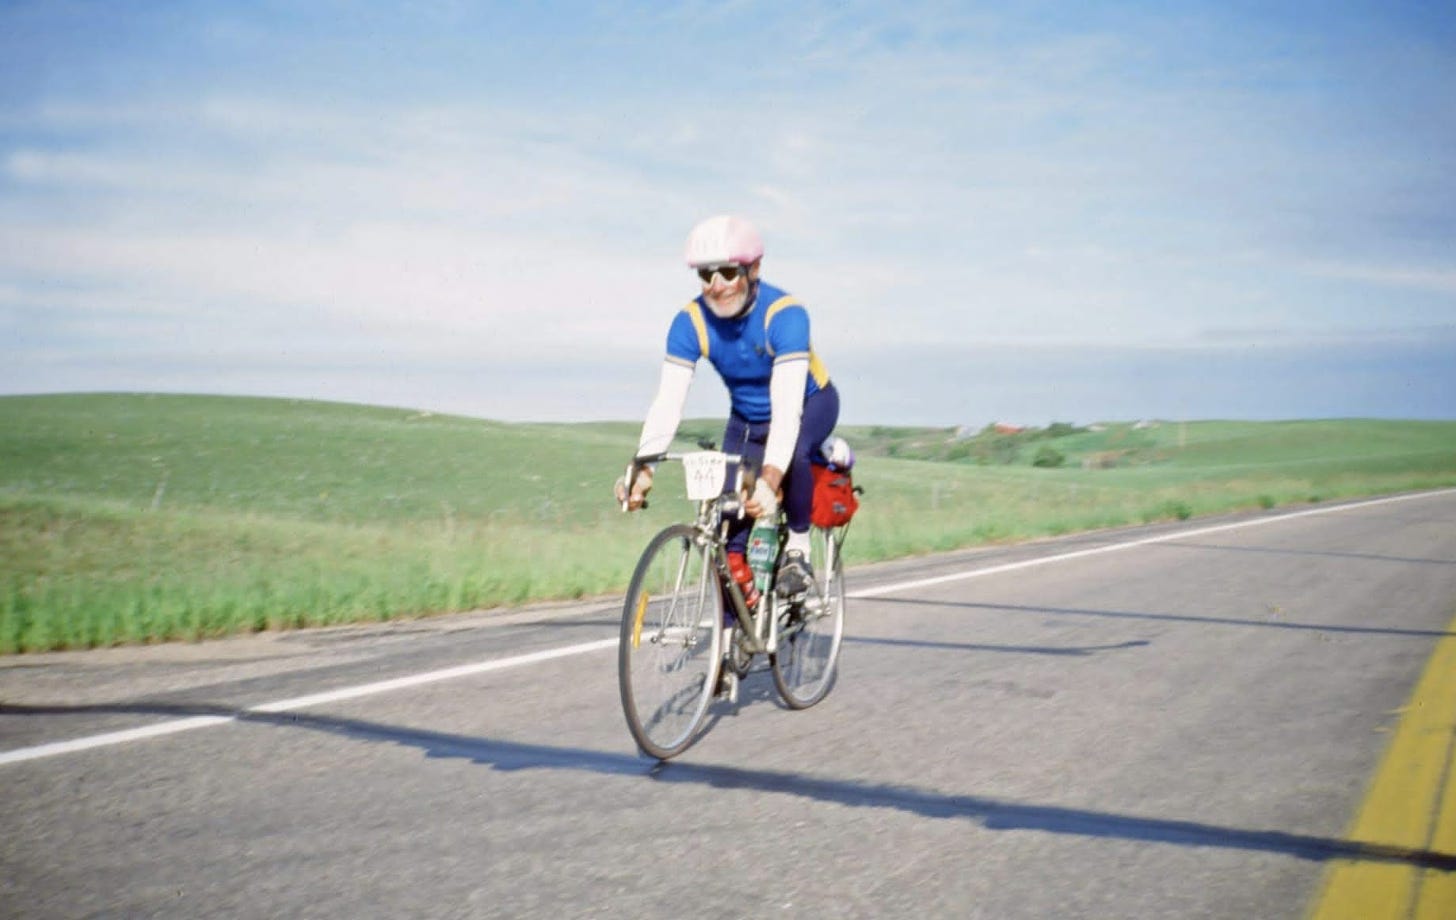 a single person wearing a blue shirt with white sleeves and navy pants and pink bicycle helmet rides a skinny-wheeled touring bicycle down an asphalt road with a yellow line visible on the right side of the frame and on the left a eternal field of green grassy and a white-and-light-blue striped sky behind